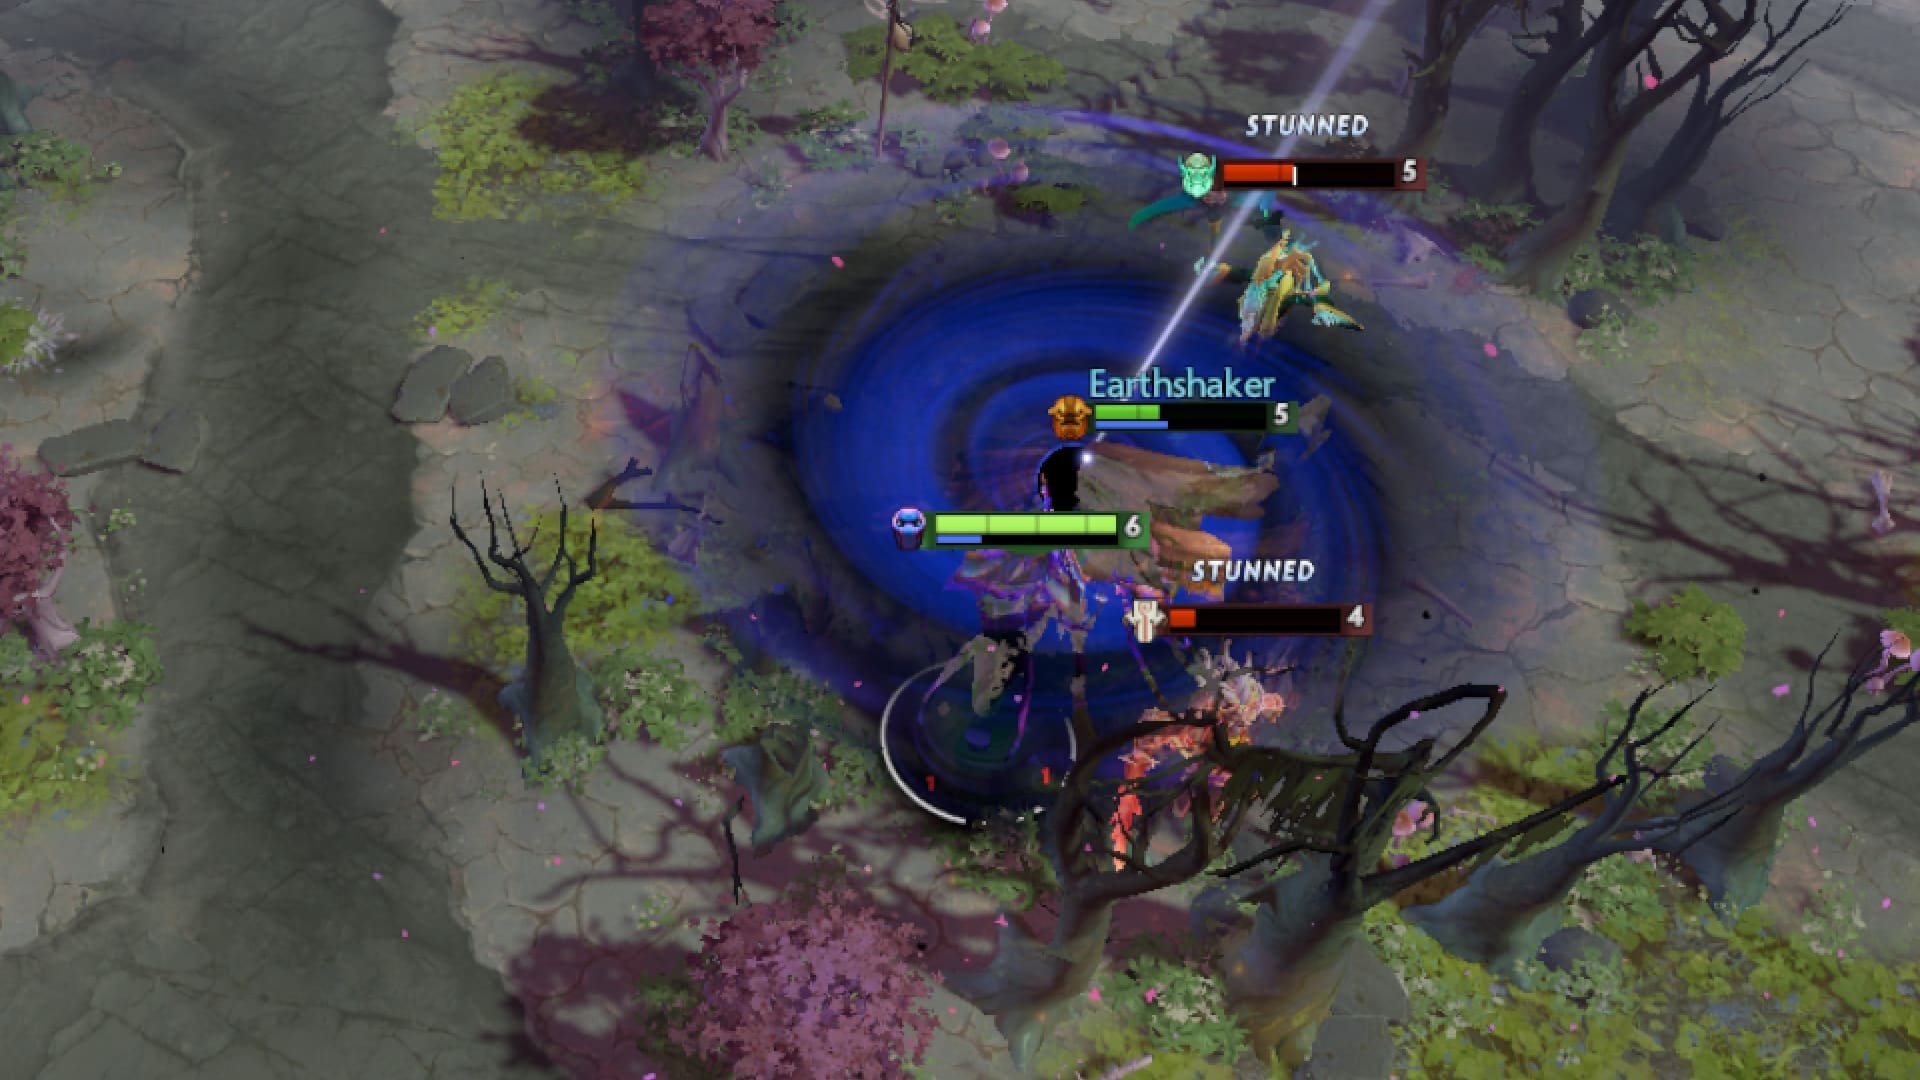 Enigma uses Black Hole to disable multiple enemies